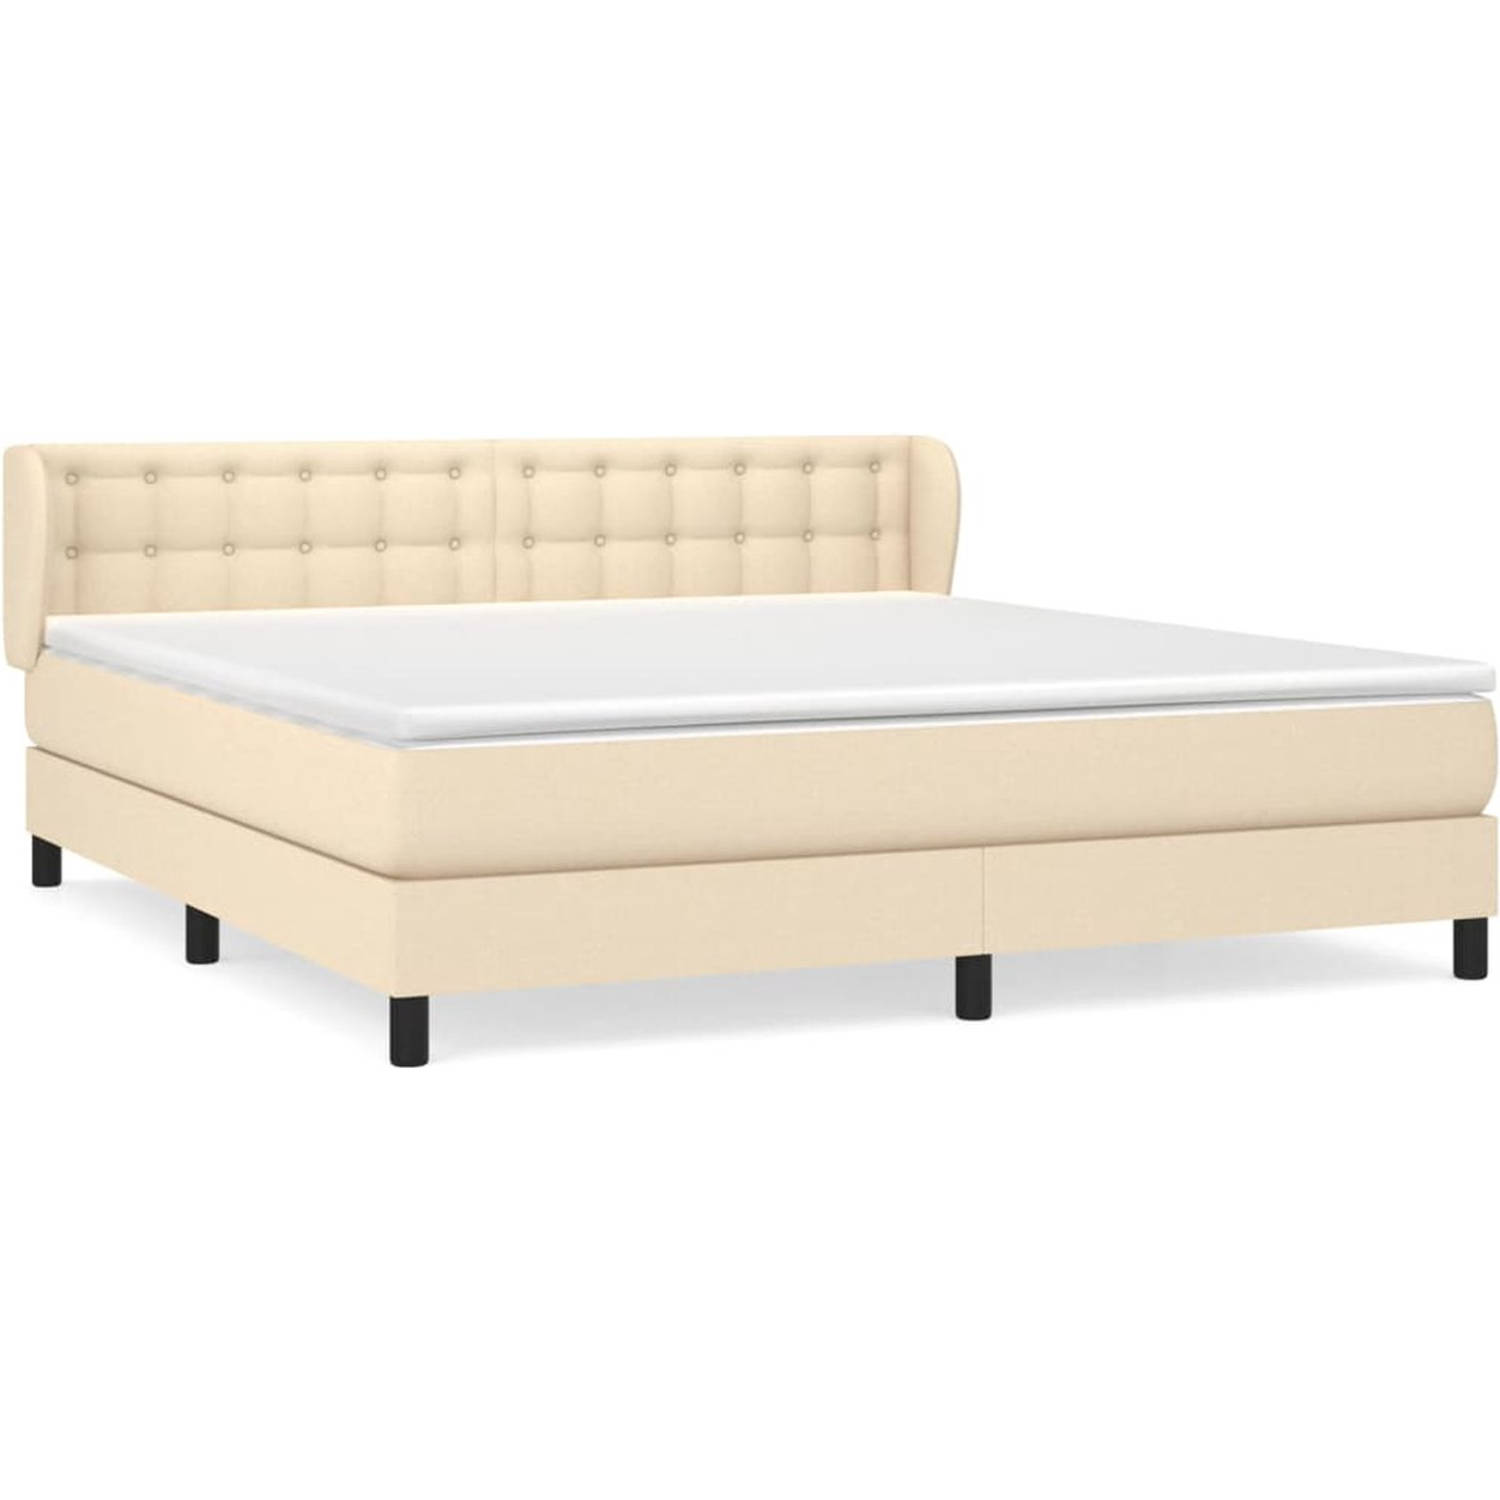 The Living Store Boxspringbed - Comfort - Bed - 203x183x78/88 cm - Crème